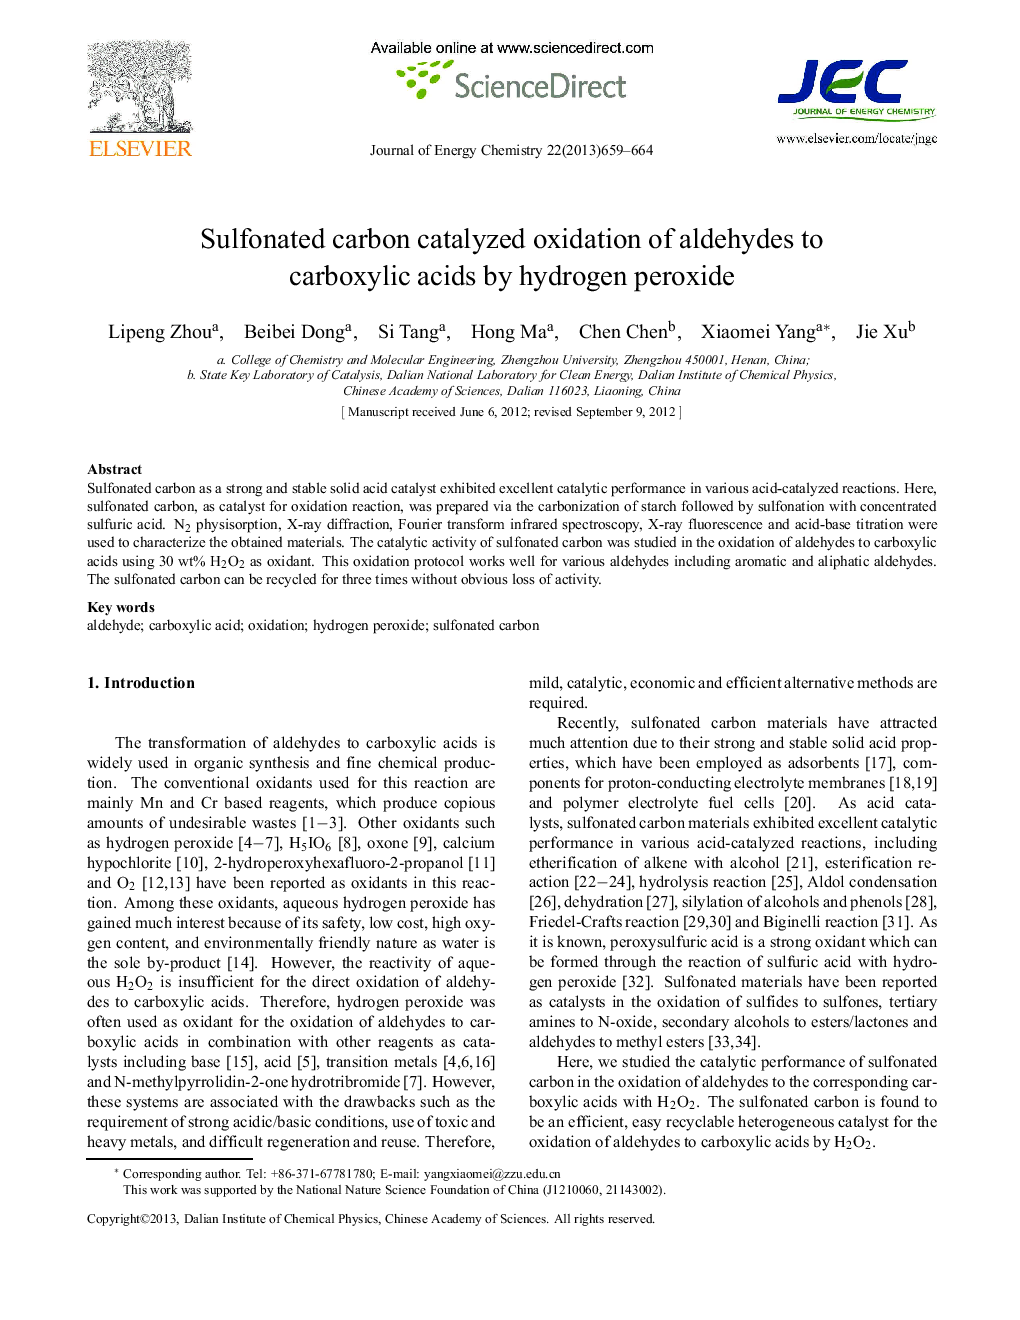 Sulfonated carbon catalyzed oxidation of aldehydes to carboxylic acids by hydrogen peroxide 